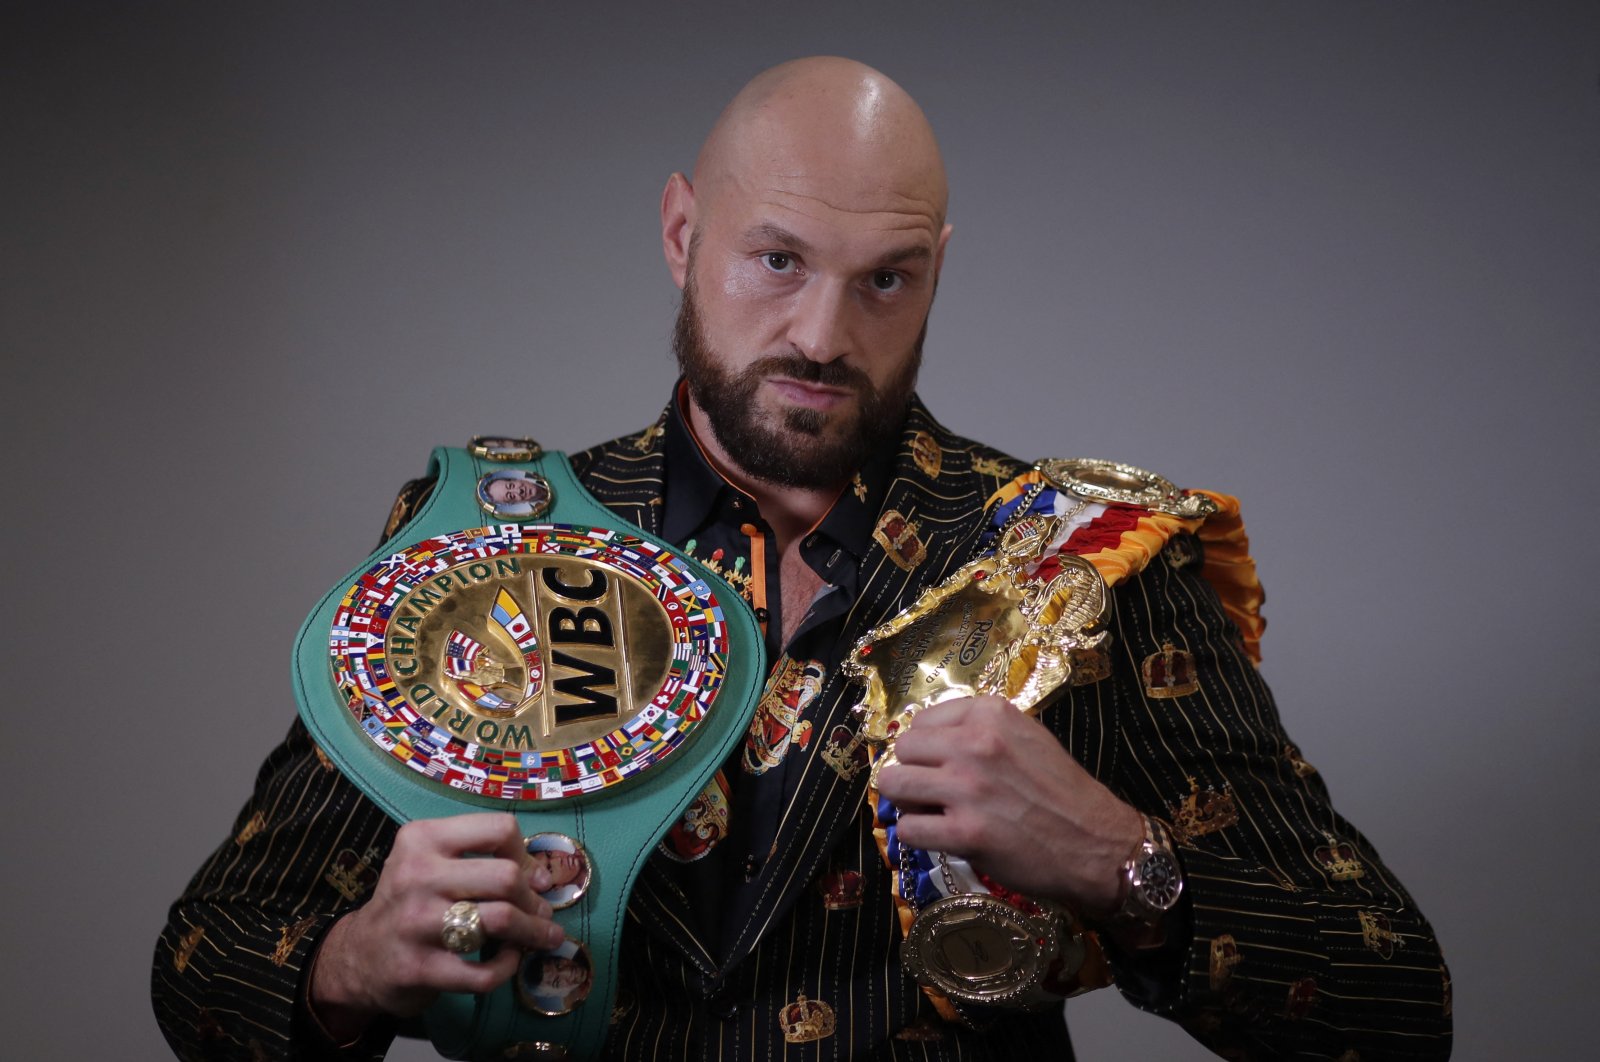 Tyson Fury poses ahead of his fight against Dillian Whyte at the Wembley Stadium in London, Britain, April 20, 2022. (Reuters Photo)